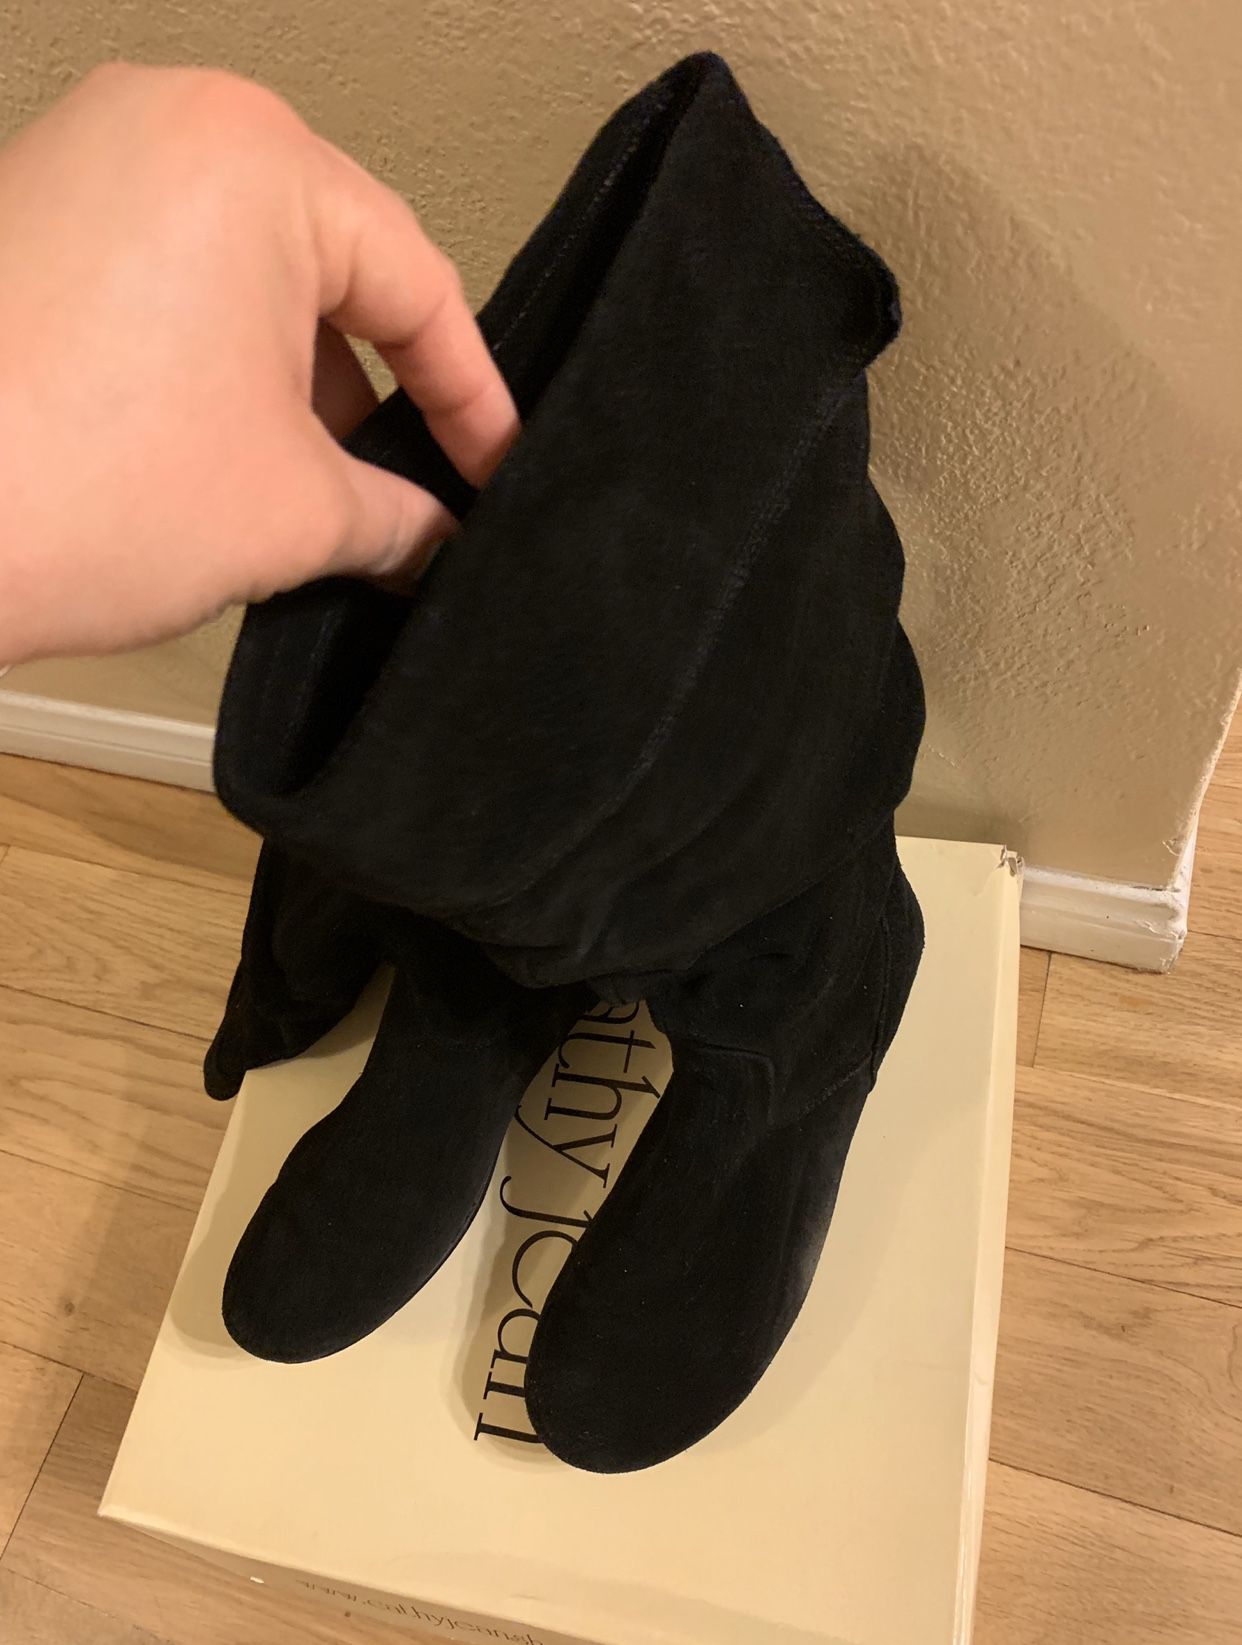 Cathy Jeans Size 7 Black Boots